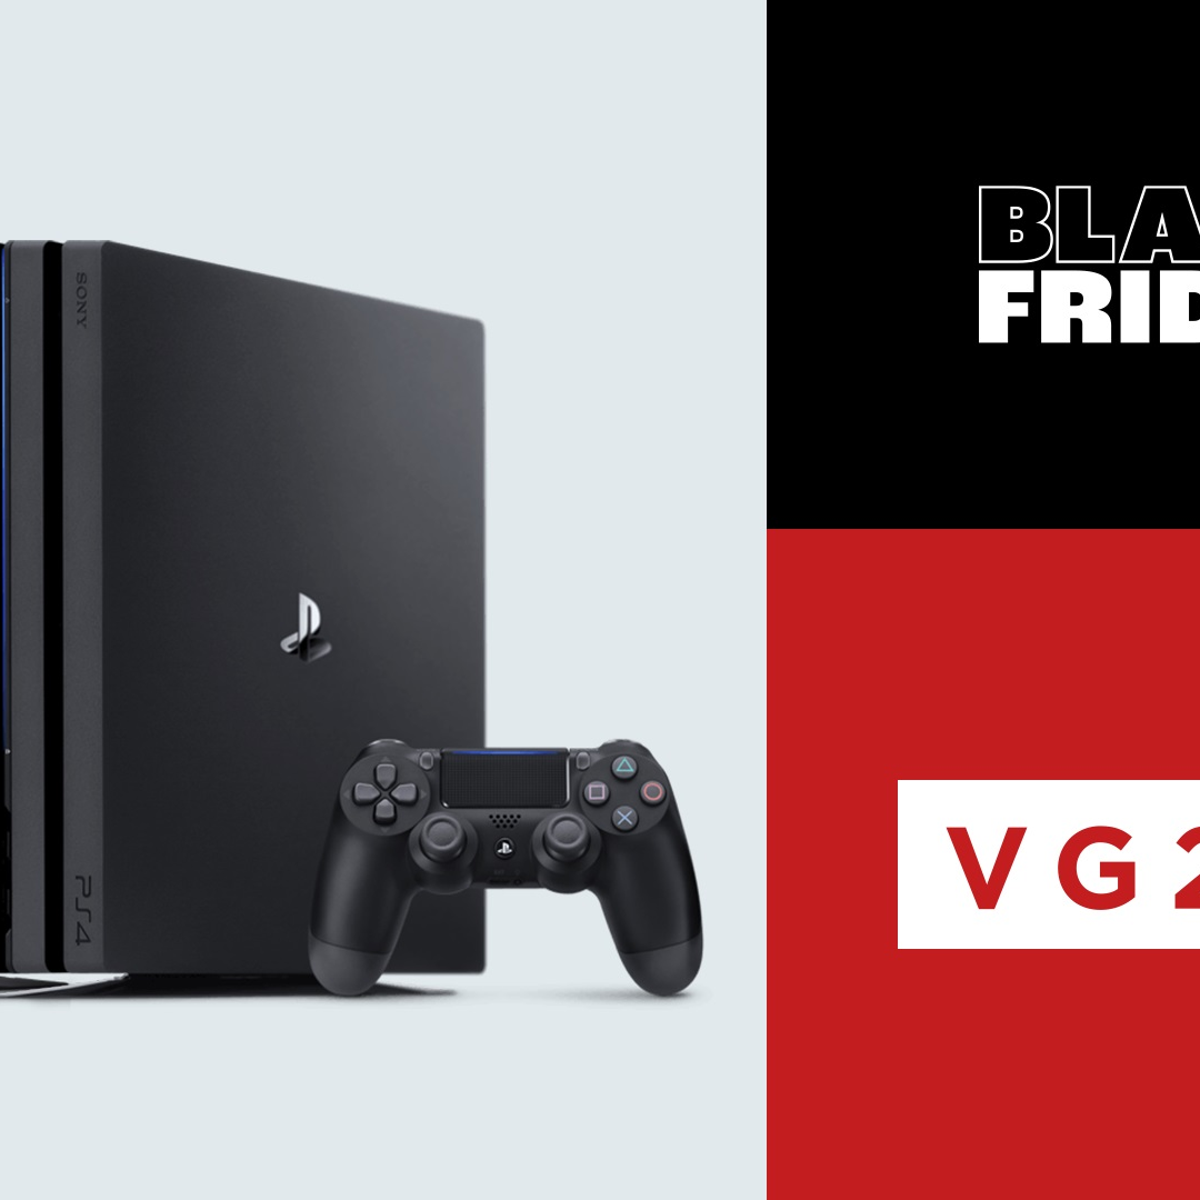 PS4 Cyber Week Deals 2019: Save on PS4 Pro, PS4, PSVR, and PS4 Games